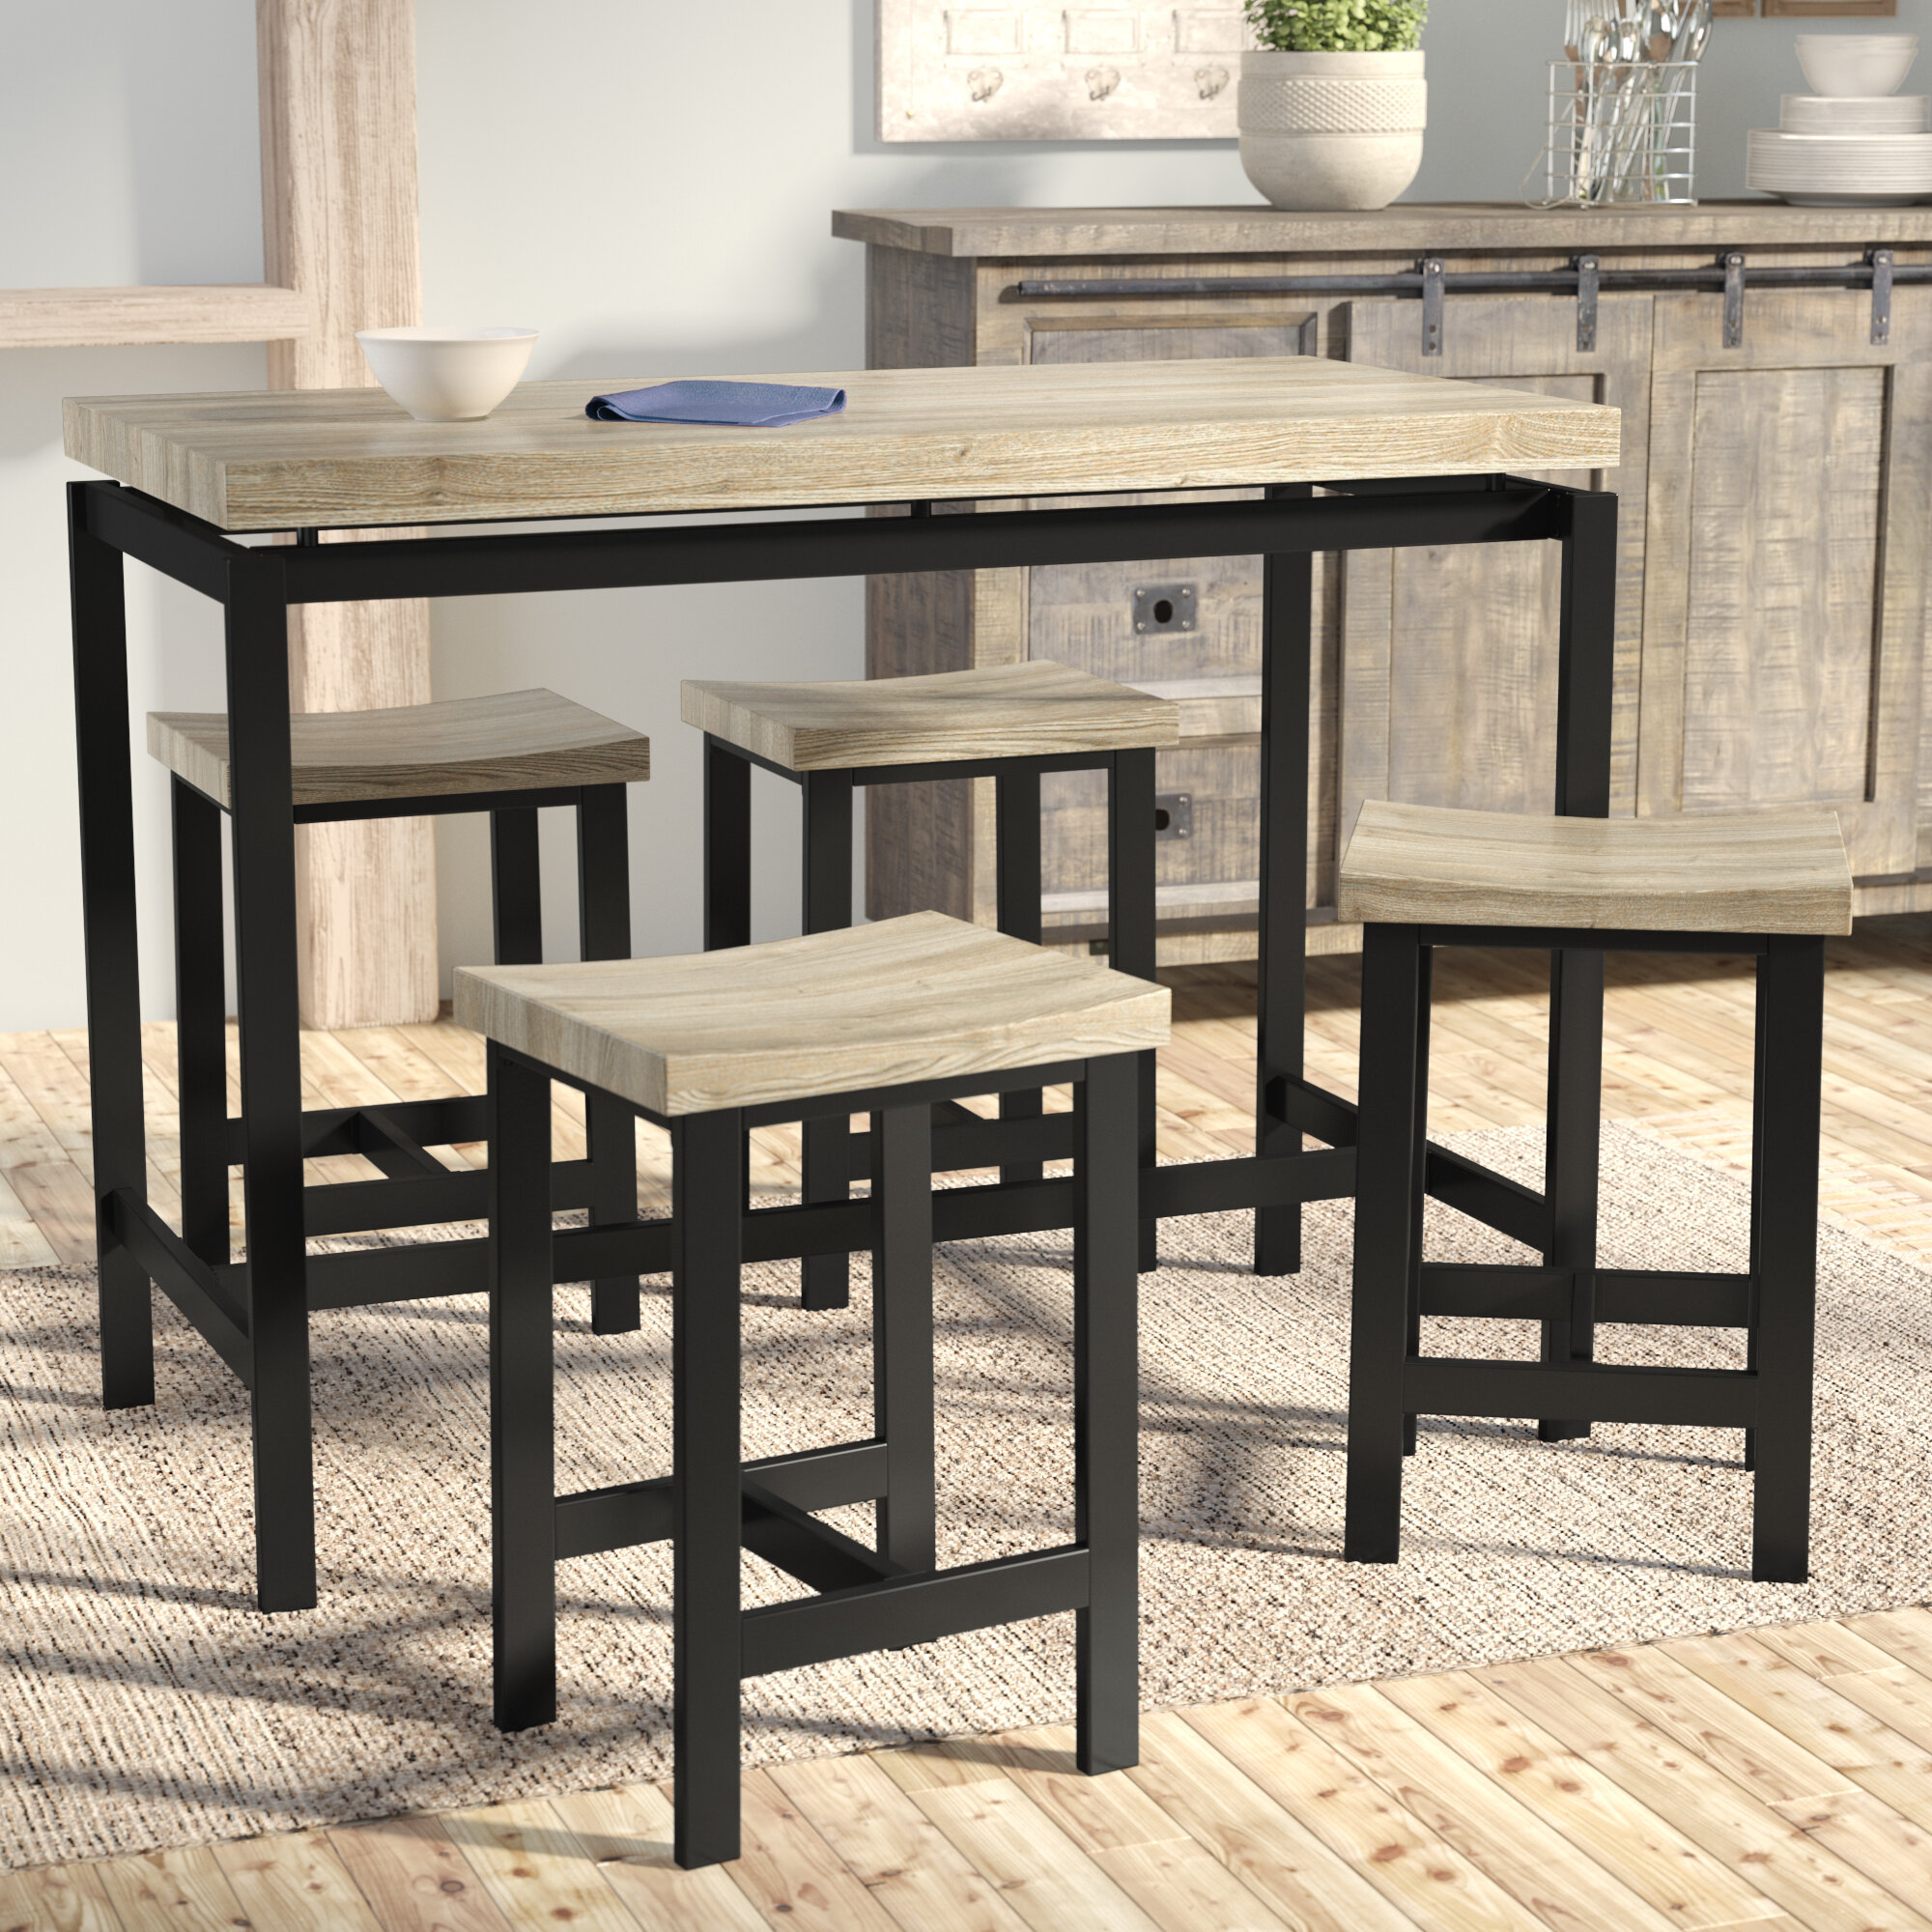 Laurel Foundry Modern Farmhouse Bourges 5 Piece Counter Height Dining Set Reviews Wayfair